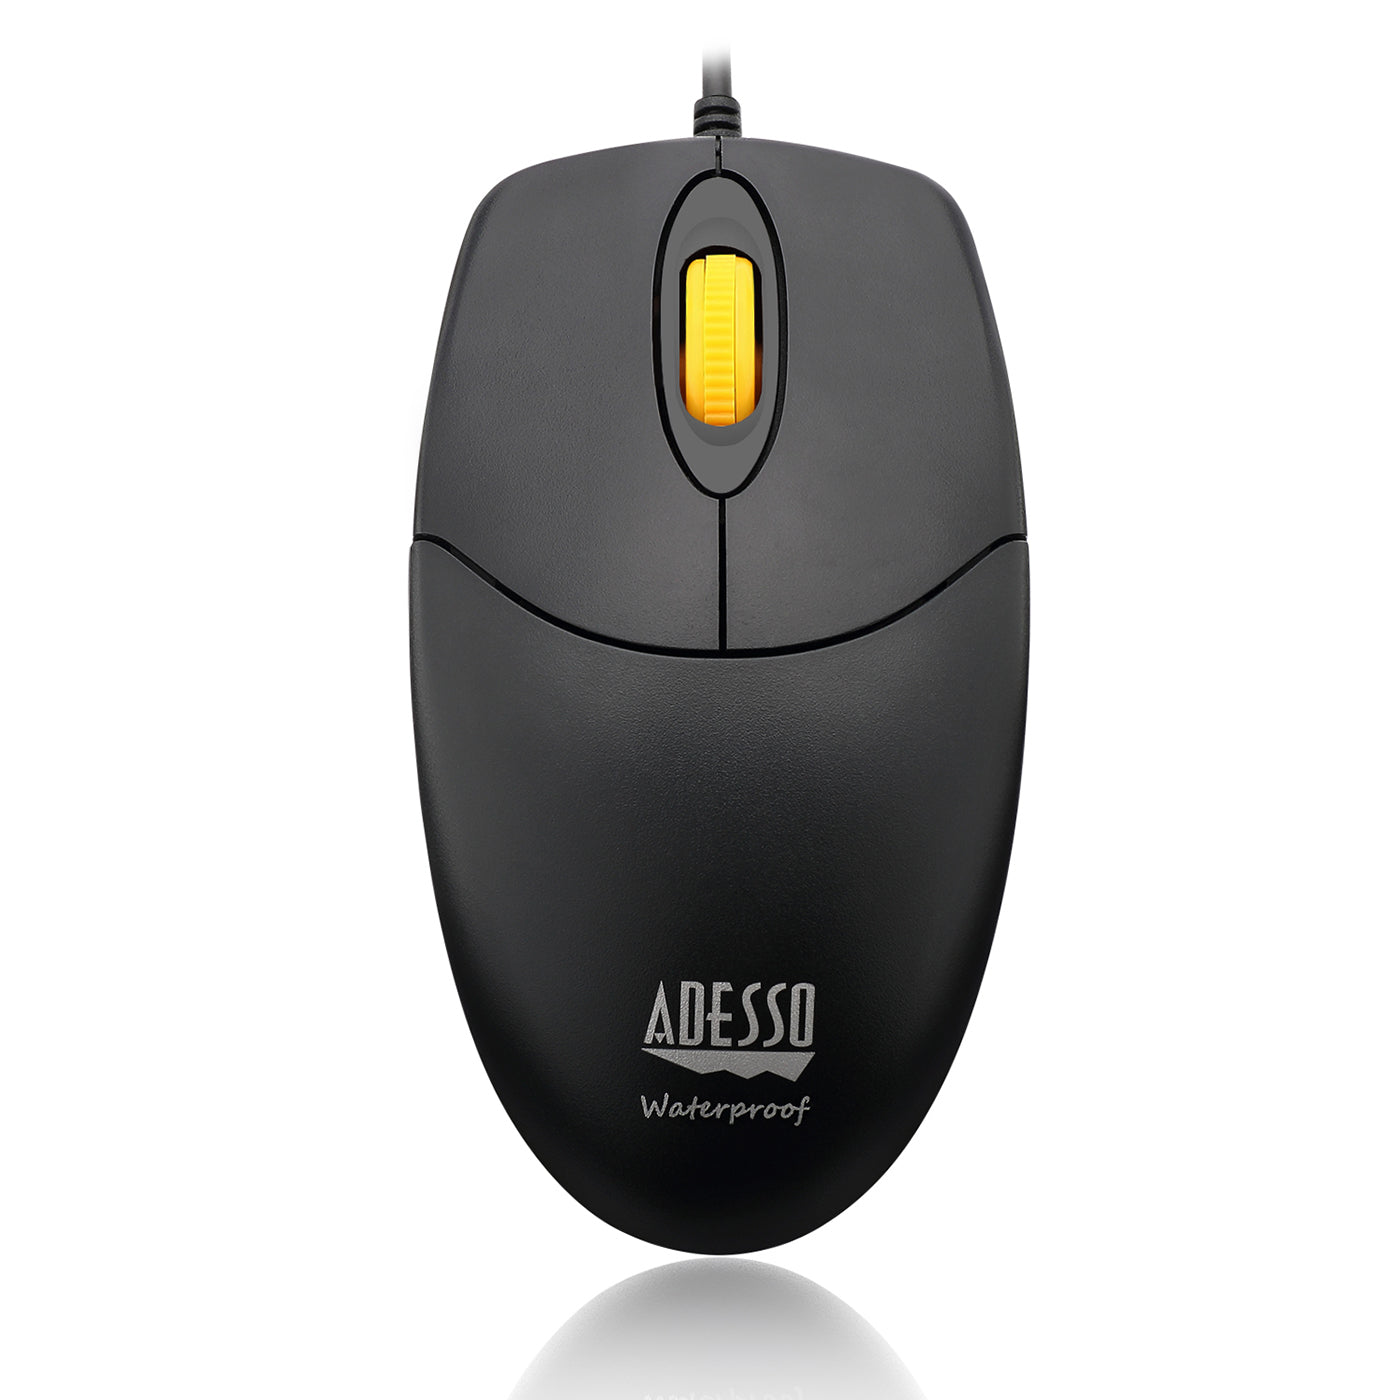 Adesso iMouse W3 - Waterproof Mouse with Magnetic Scroll Wheel SpadezStore